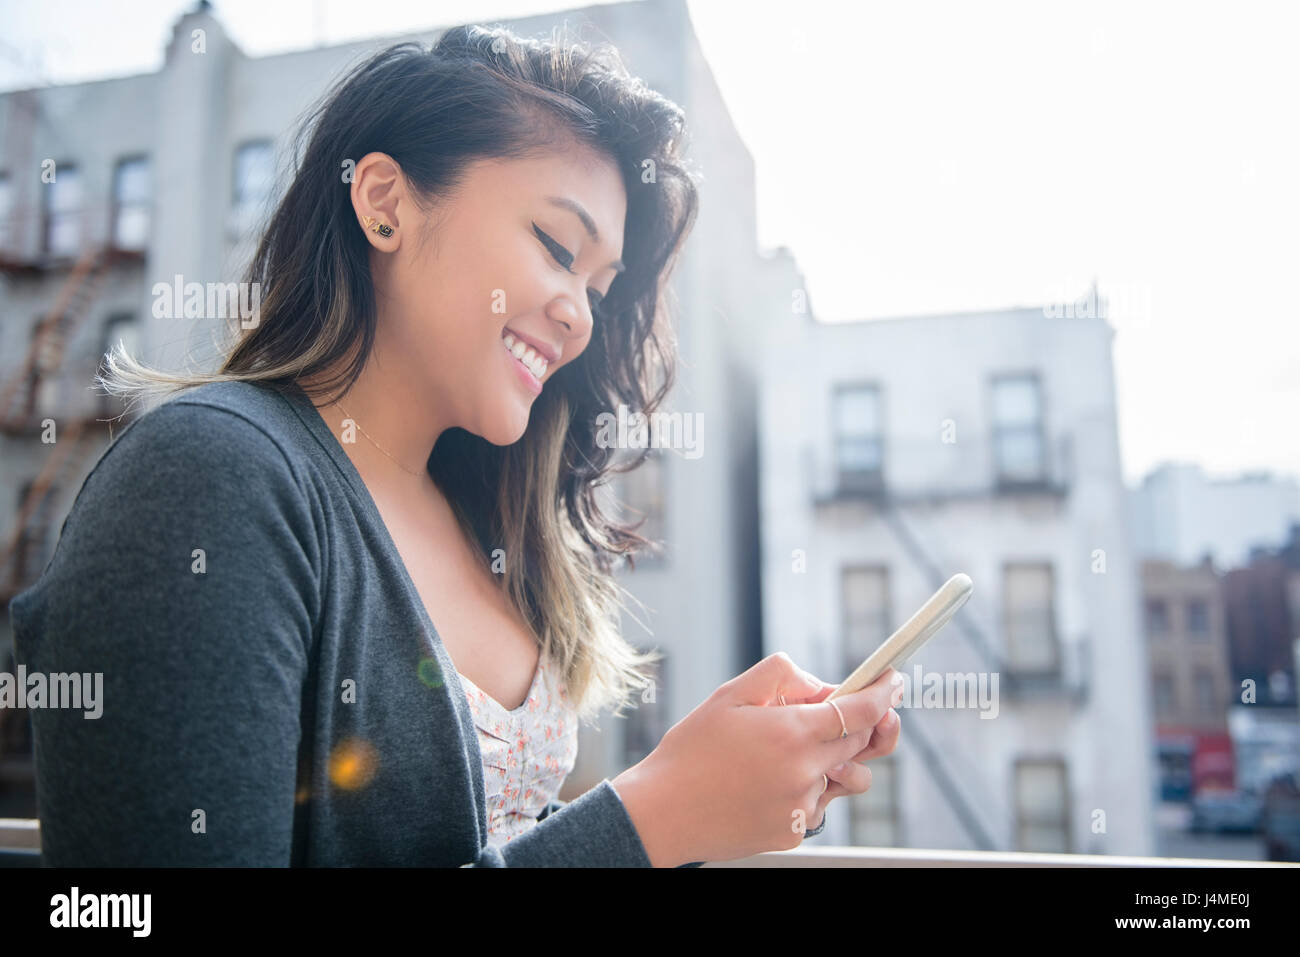 Mixed Race woman texting on cell phone in city Stock Photo